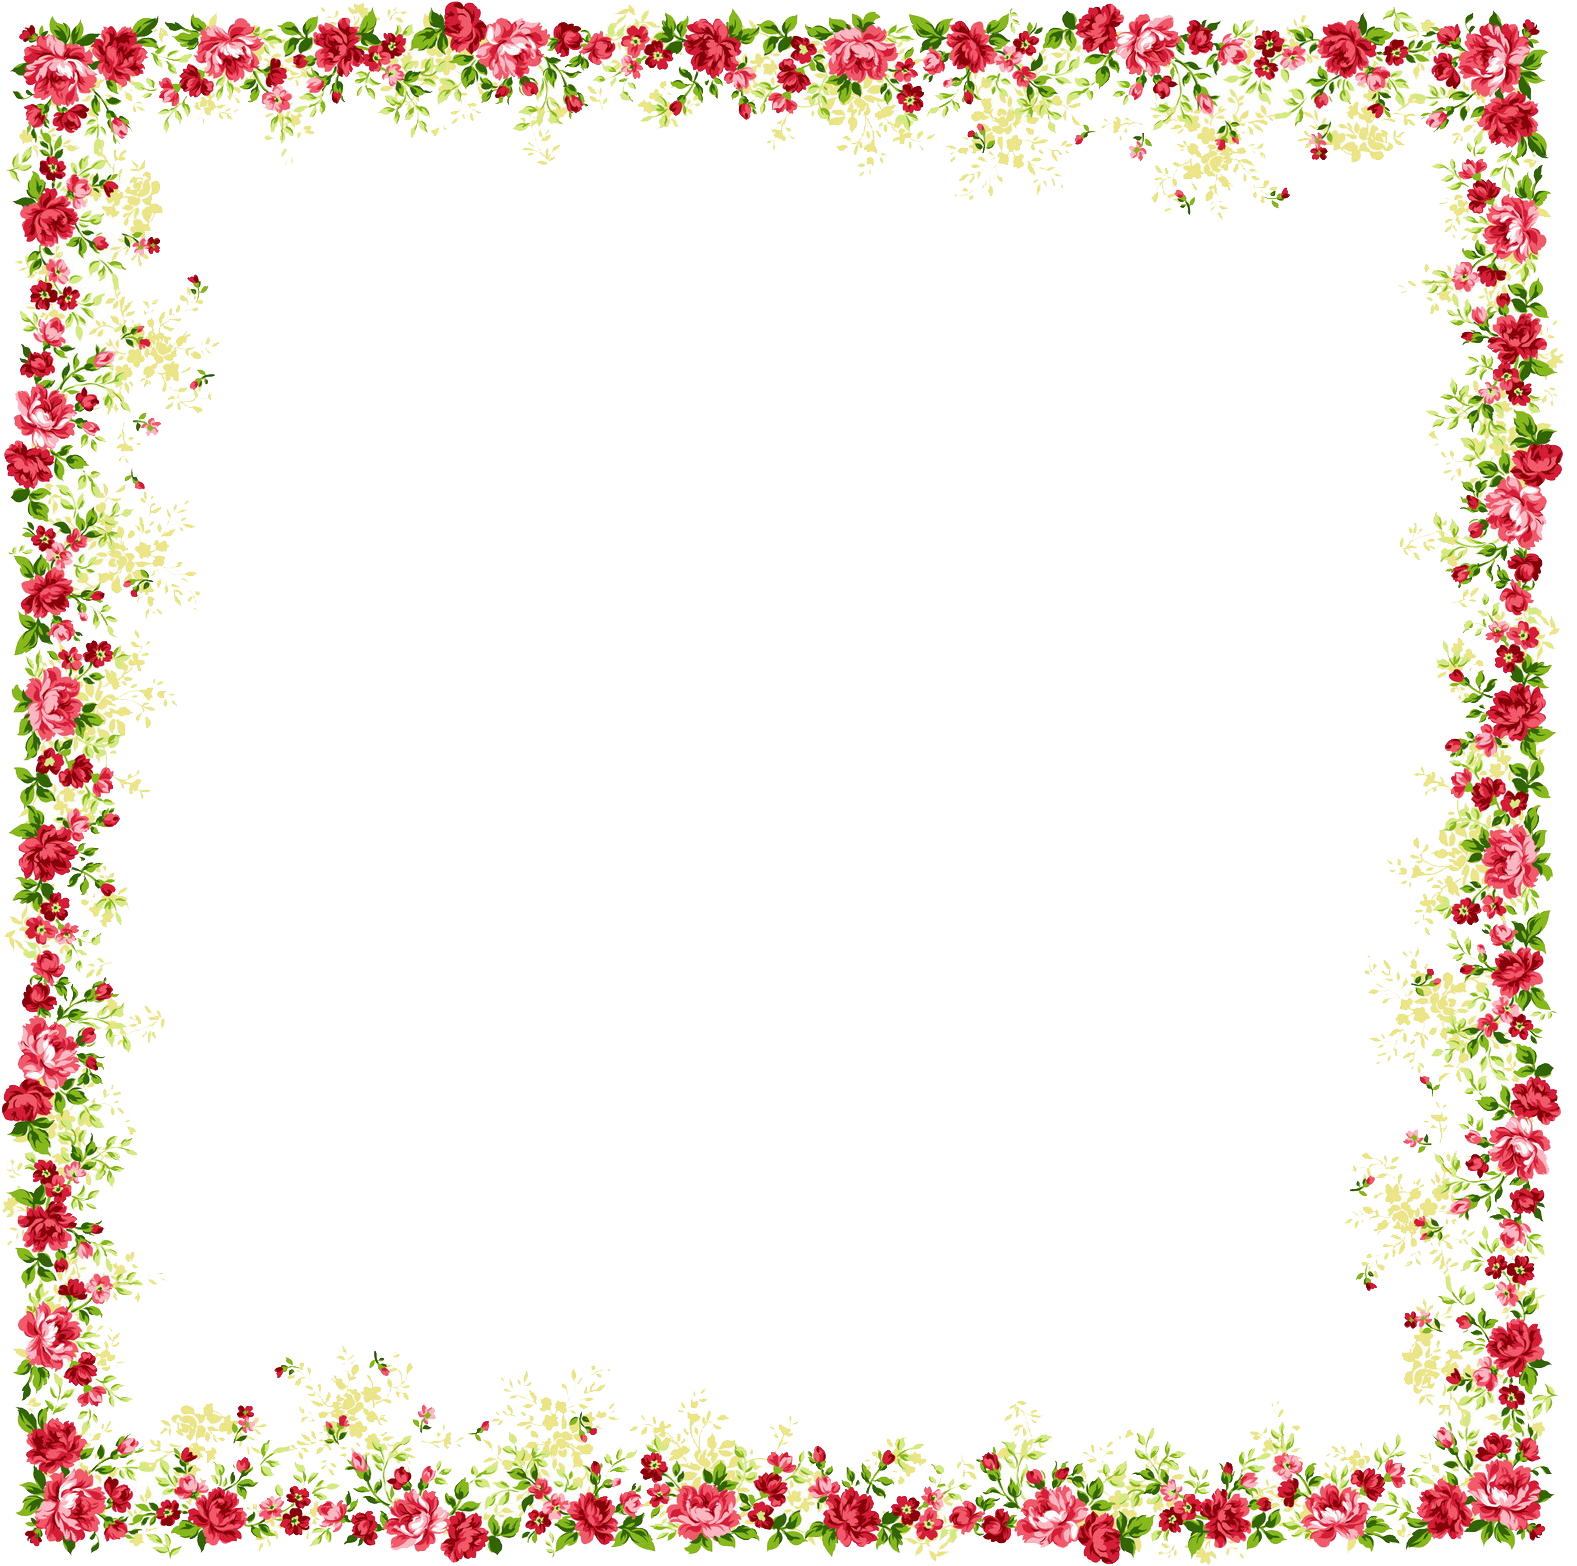 Borders And Frames Picture Frame Flower Clip Art - Flower And Butterfly Border Design (1600x1600)